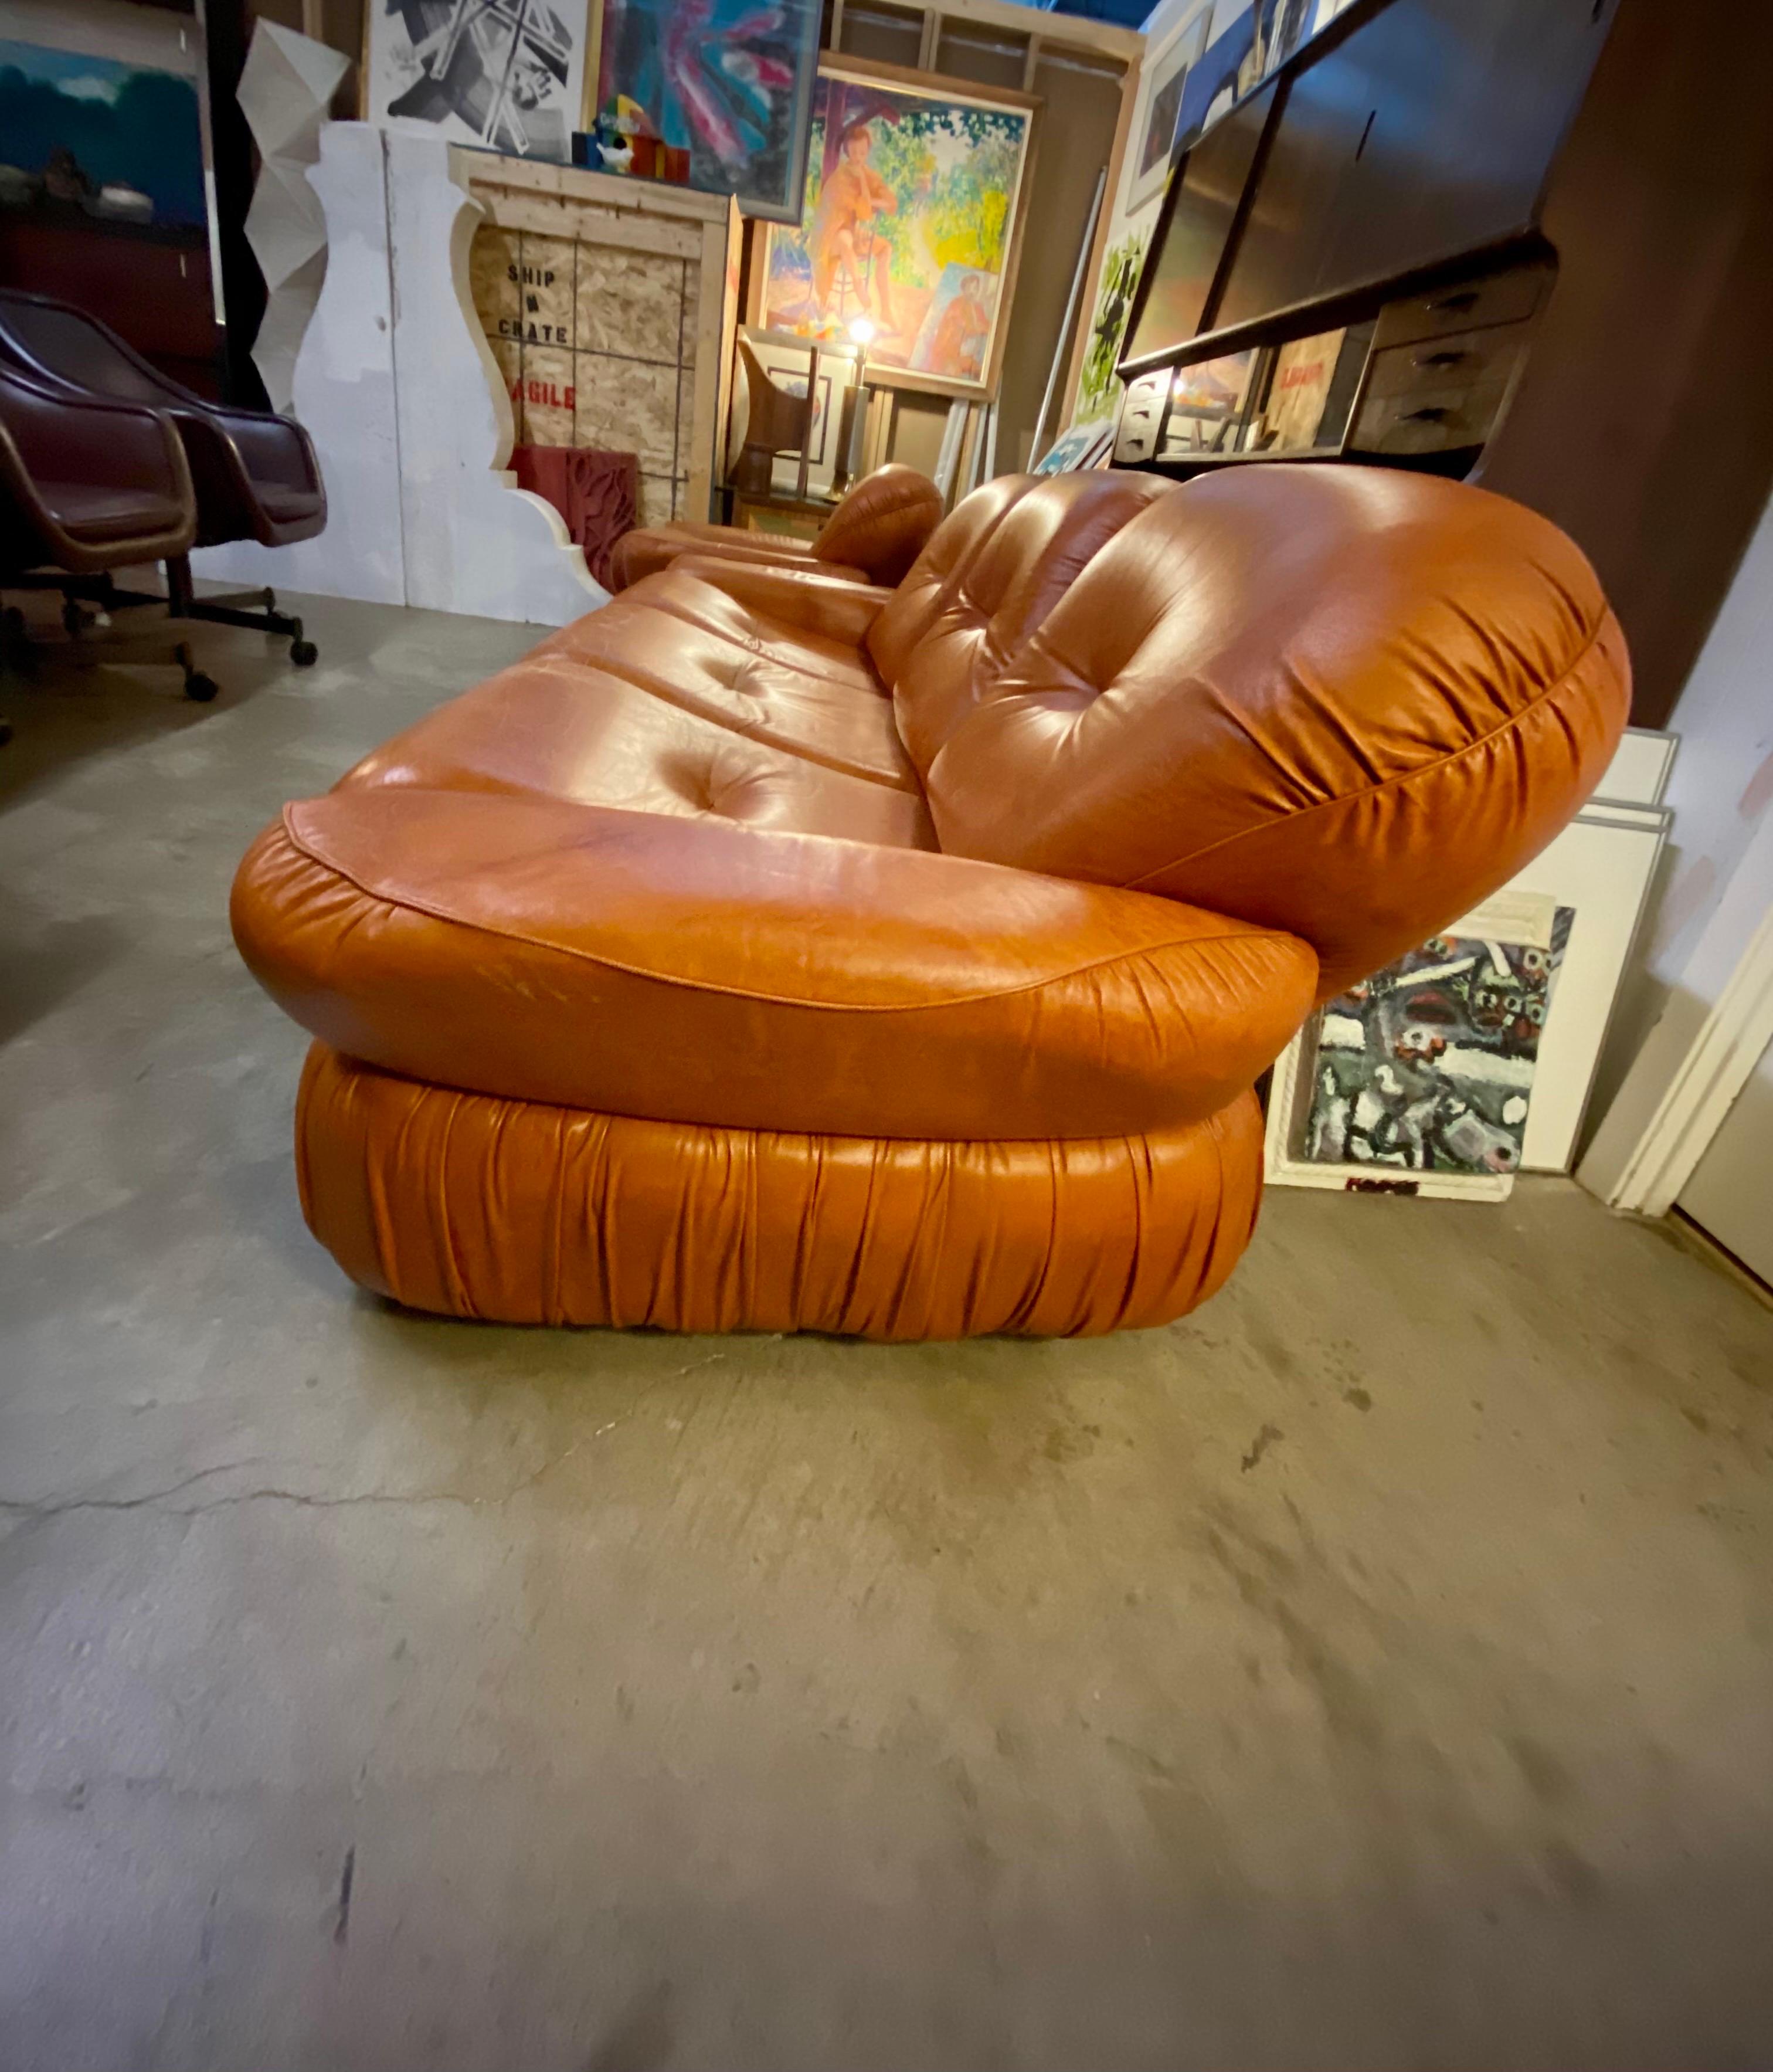 Vintage Italian three-seater leather sofa, 1970s in a beautiful burnt orange color features a nice patina and is in great overall condition. Maker is unknown.